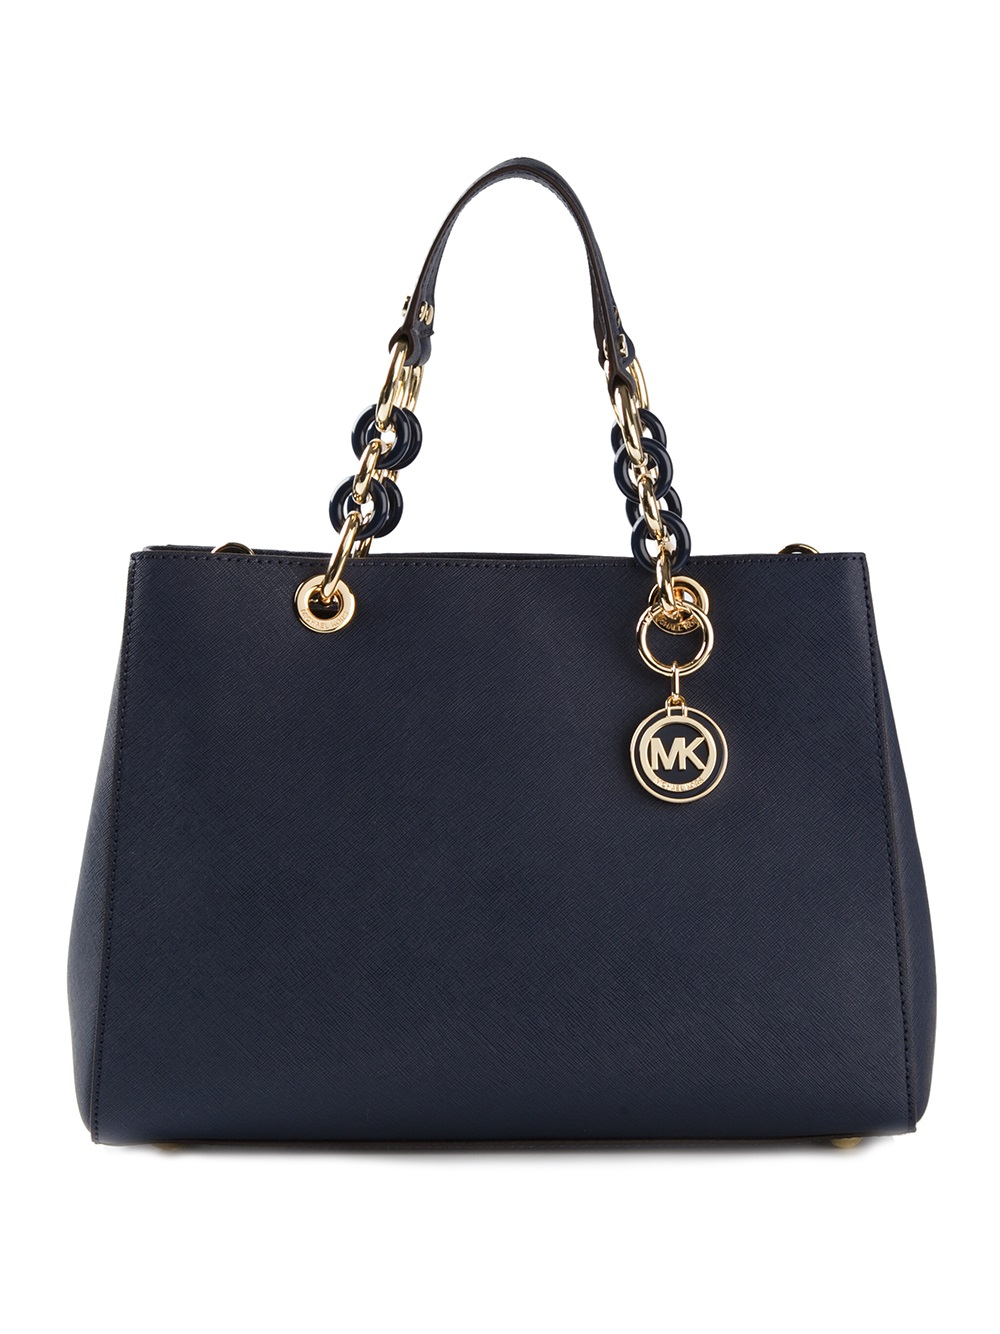 MICHAEL Michael Kors Leather 'cynthia' Tote in Blue - Lyst